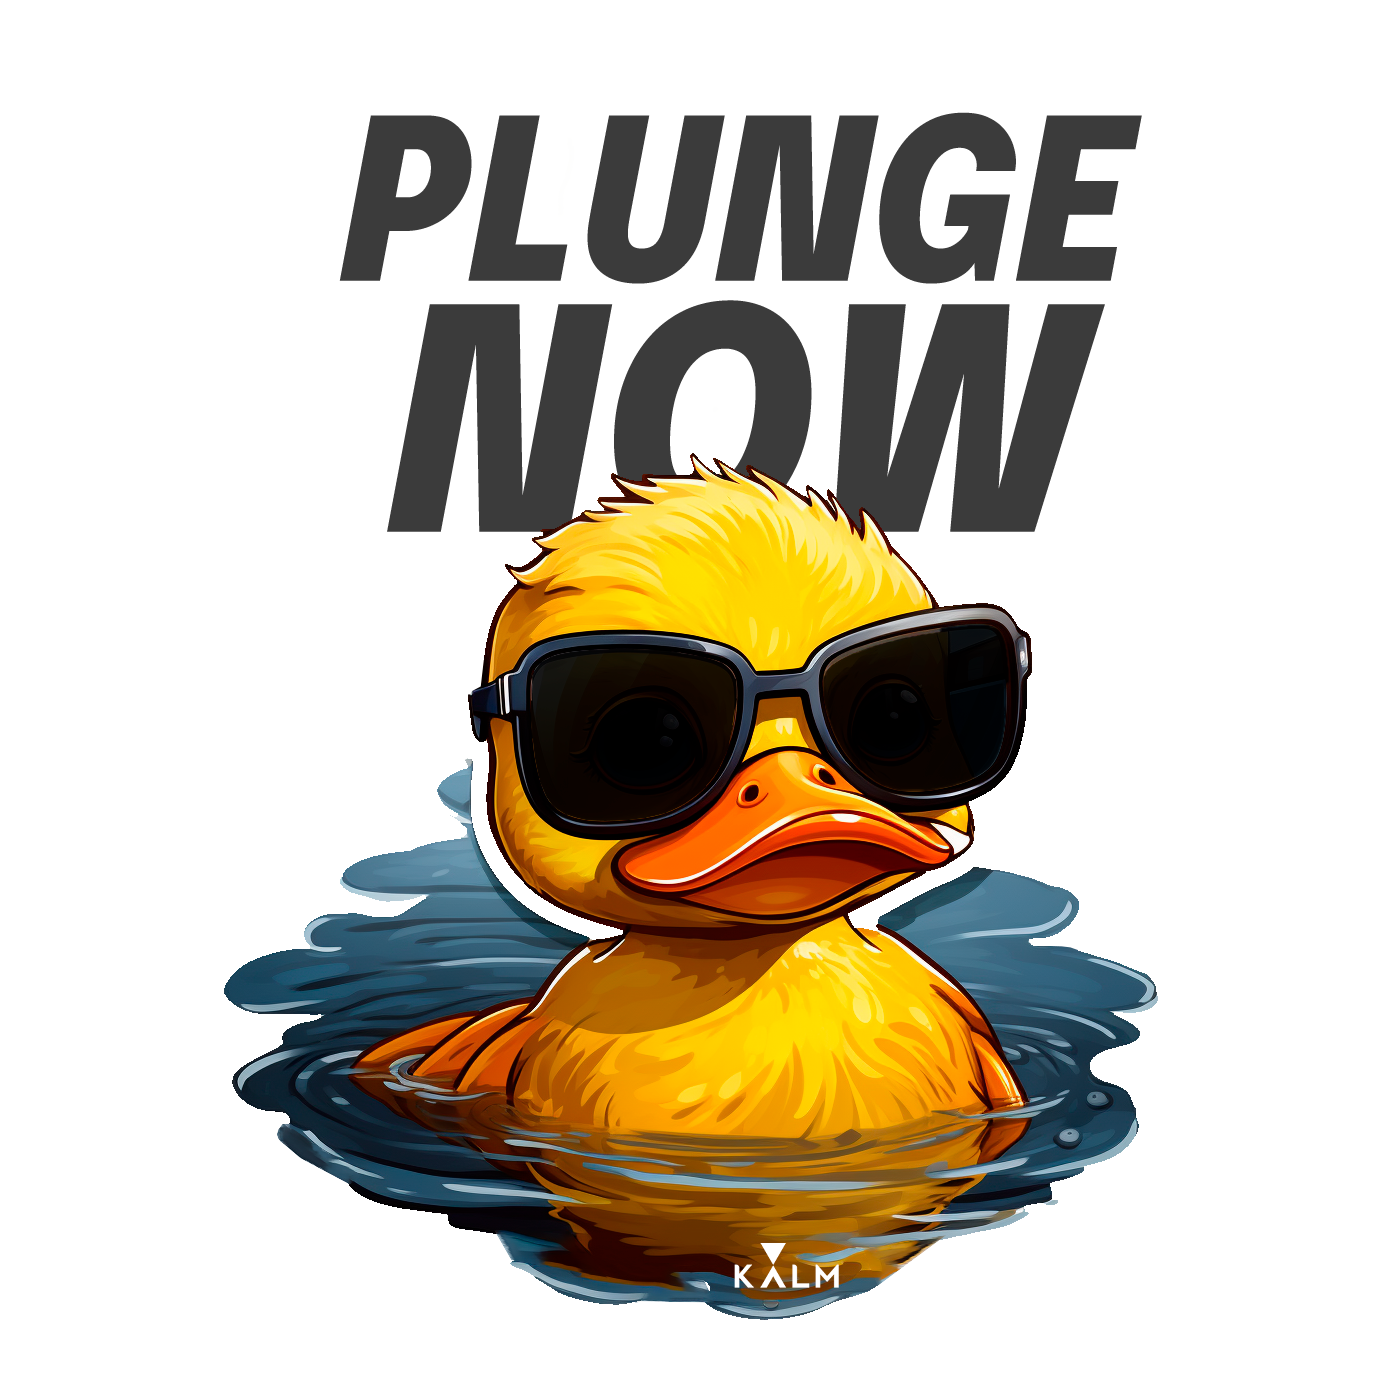 Kalm ''PLUNGE NOW'' Rubber Duck Sticker. Personalize Anything with Our Stickers, Durable and Water-Resistant